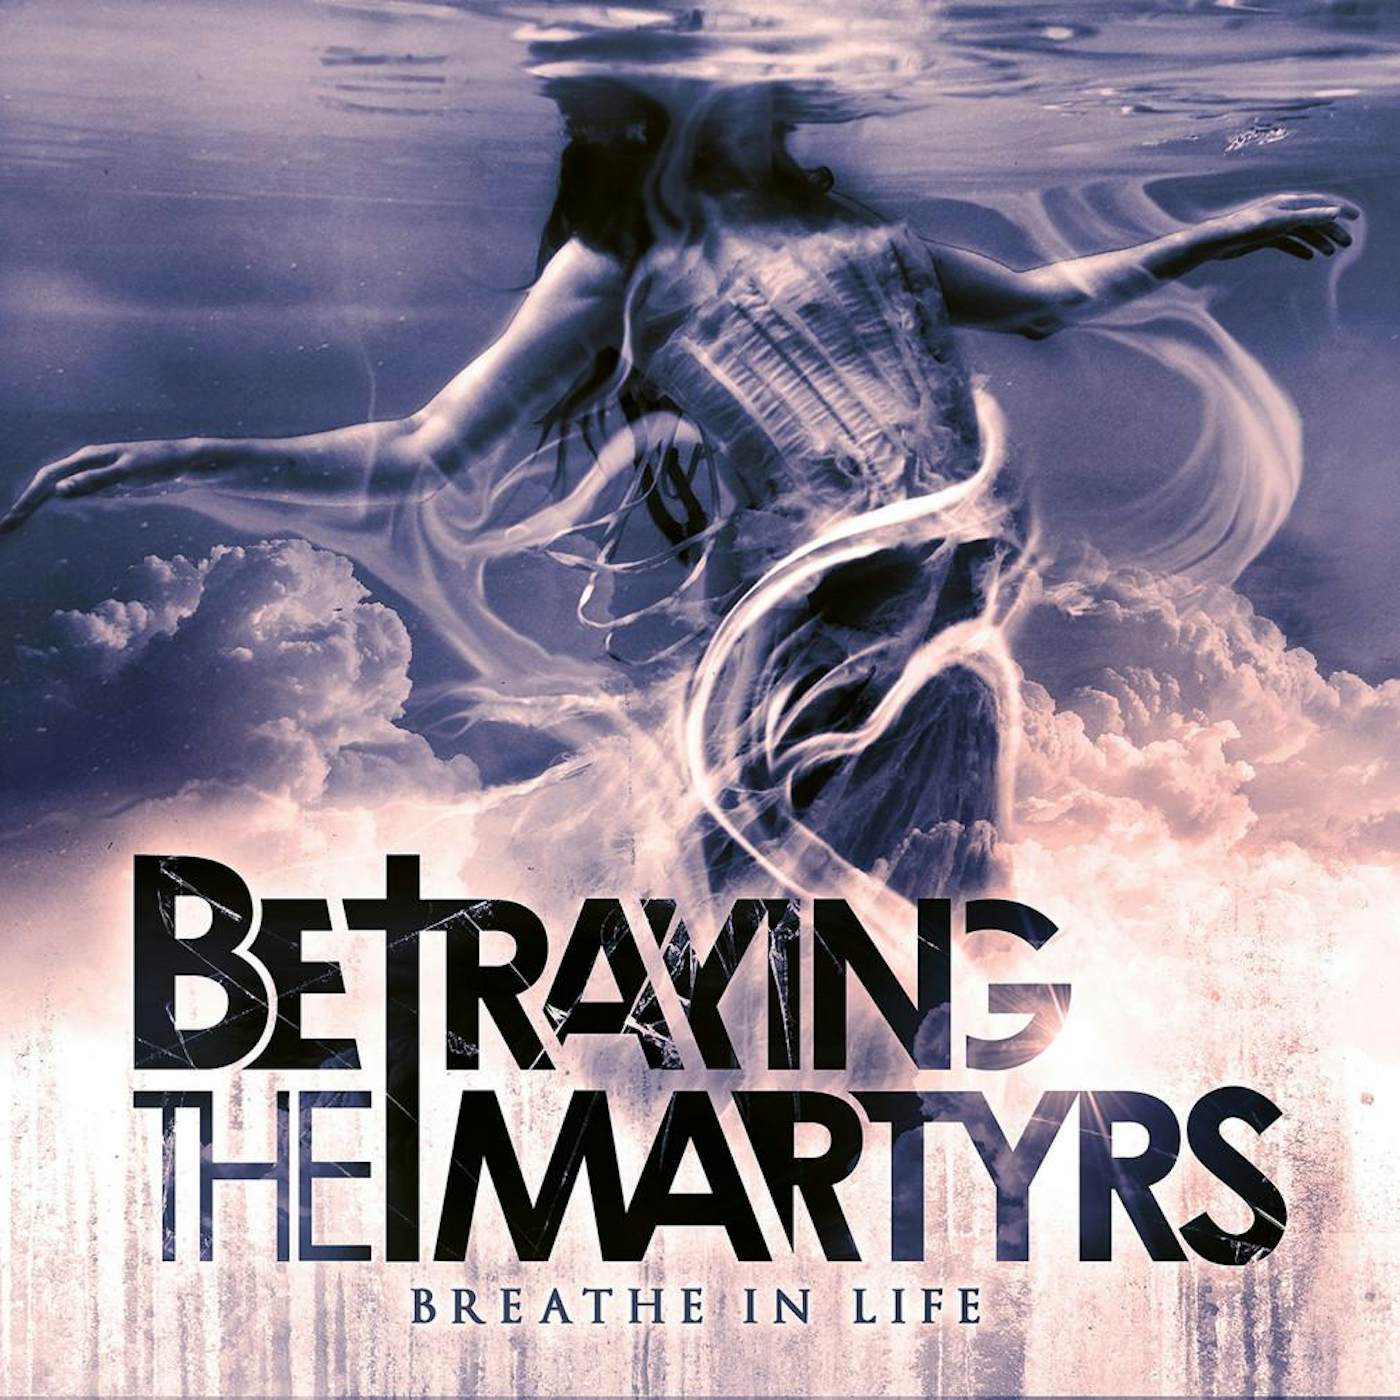 Betraying the Martyrs - 'Breathe In Life' CD